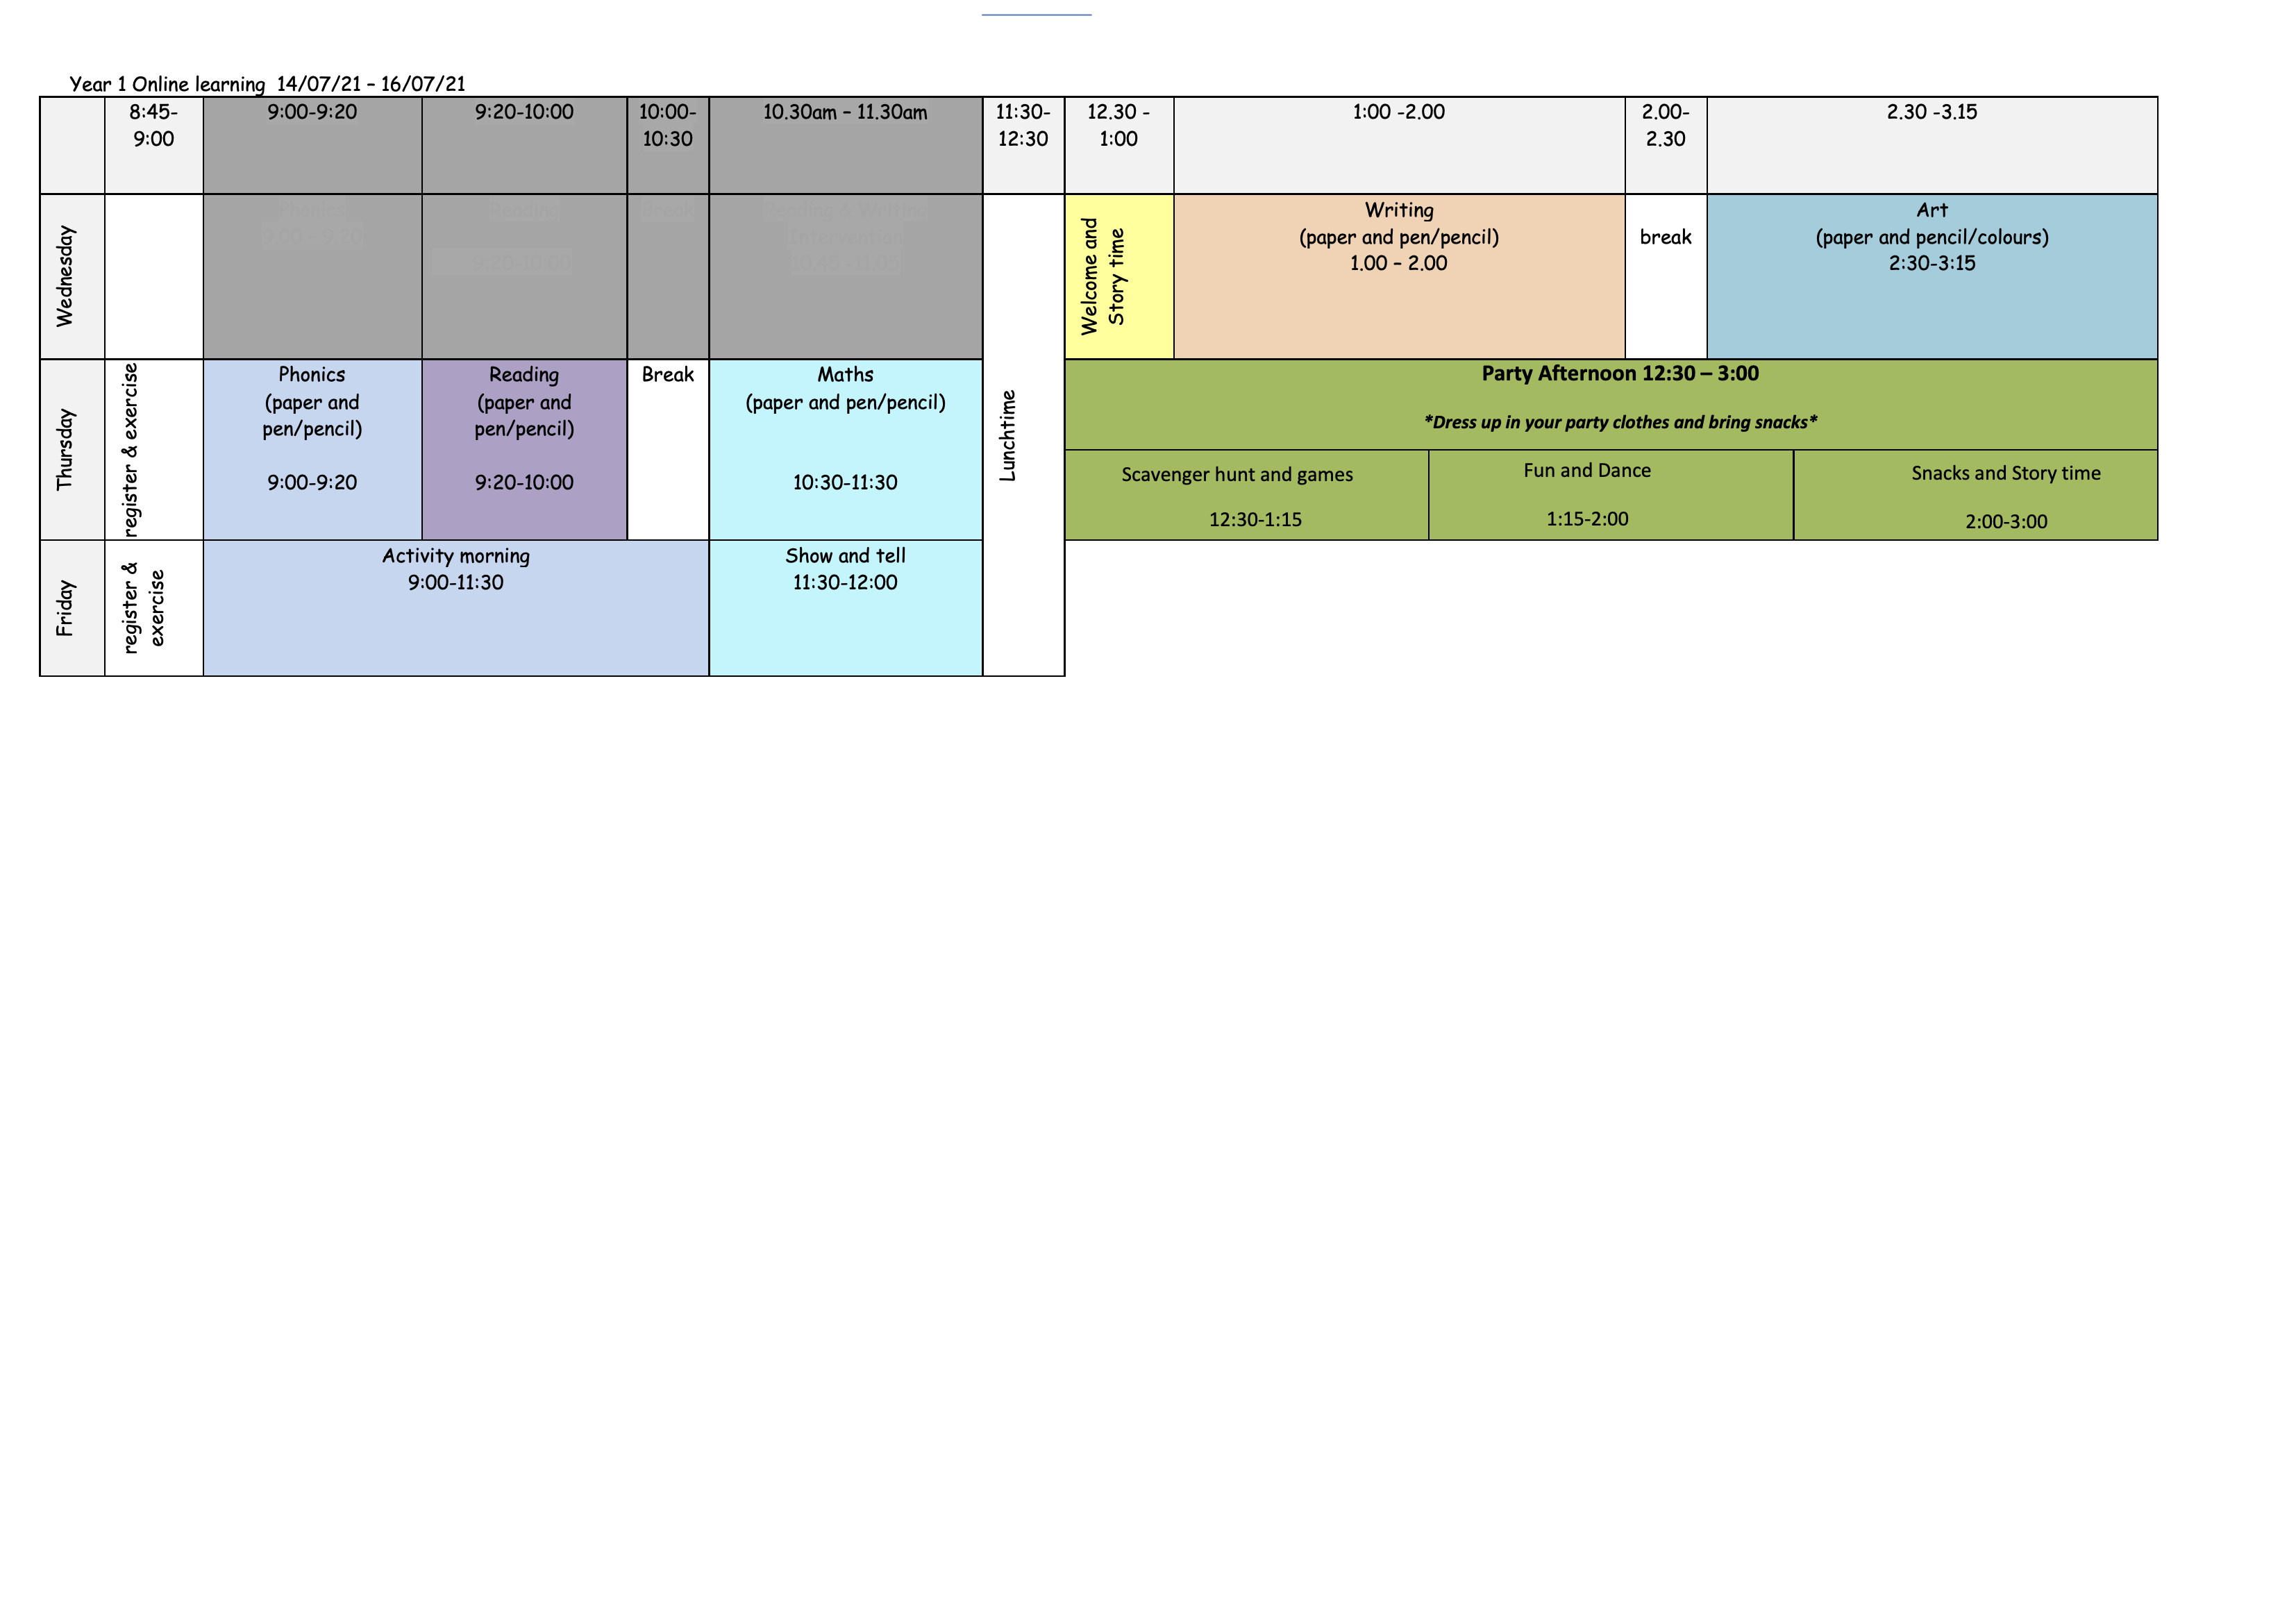 Year 1 Timetable for Online Learning